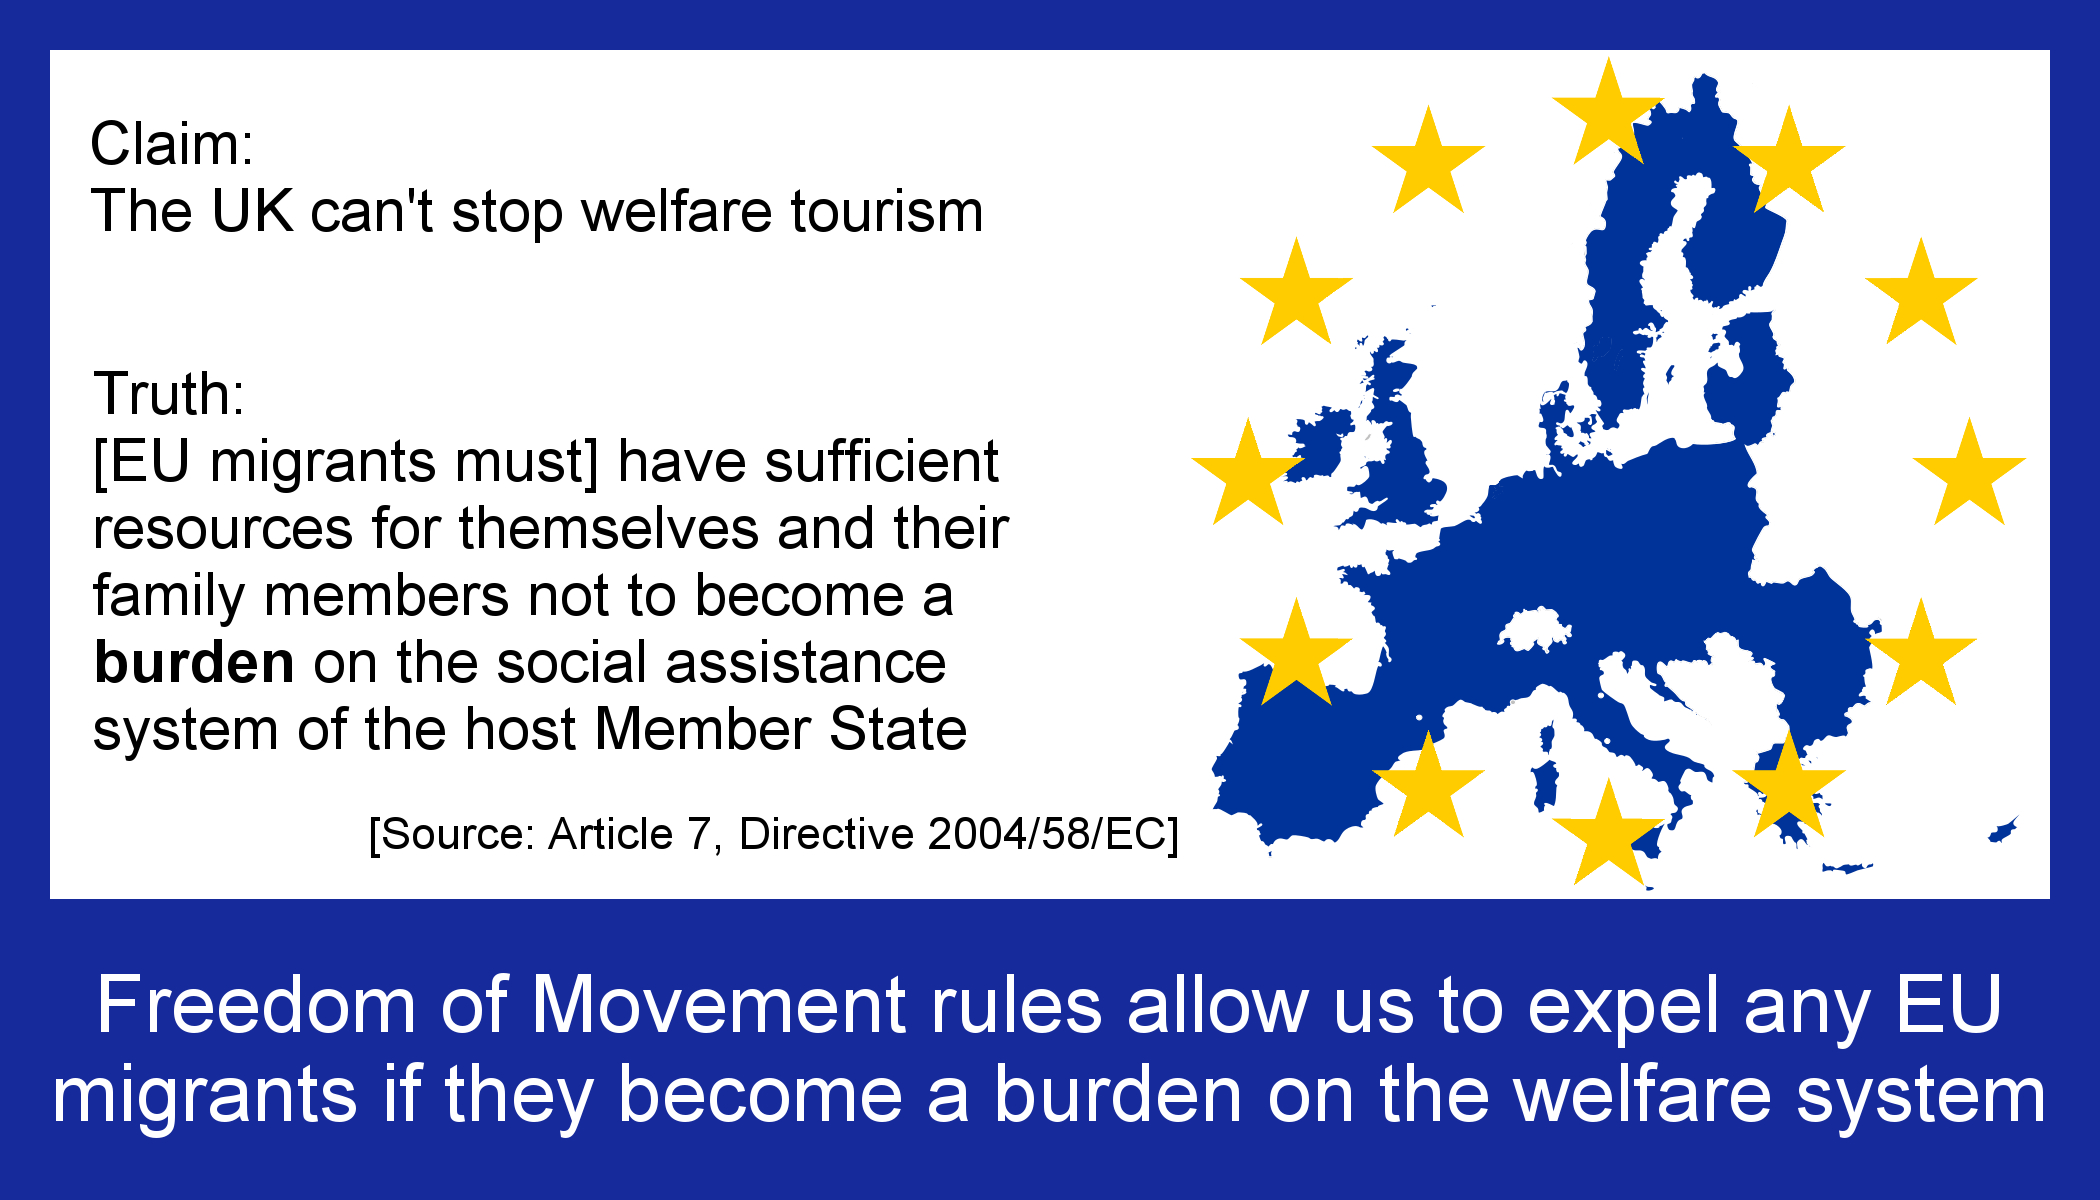 Britain has all the powers it needs to prevent welfare tourism